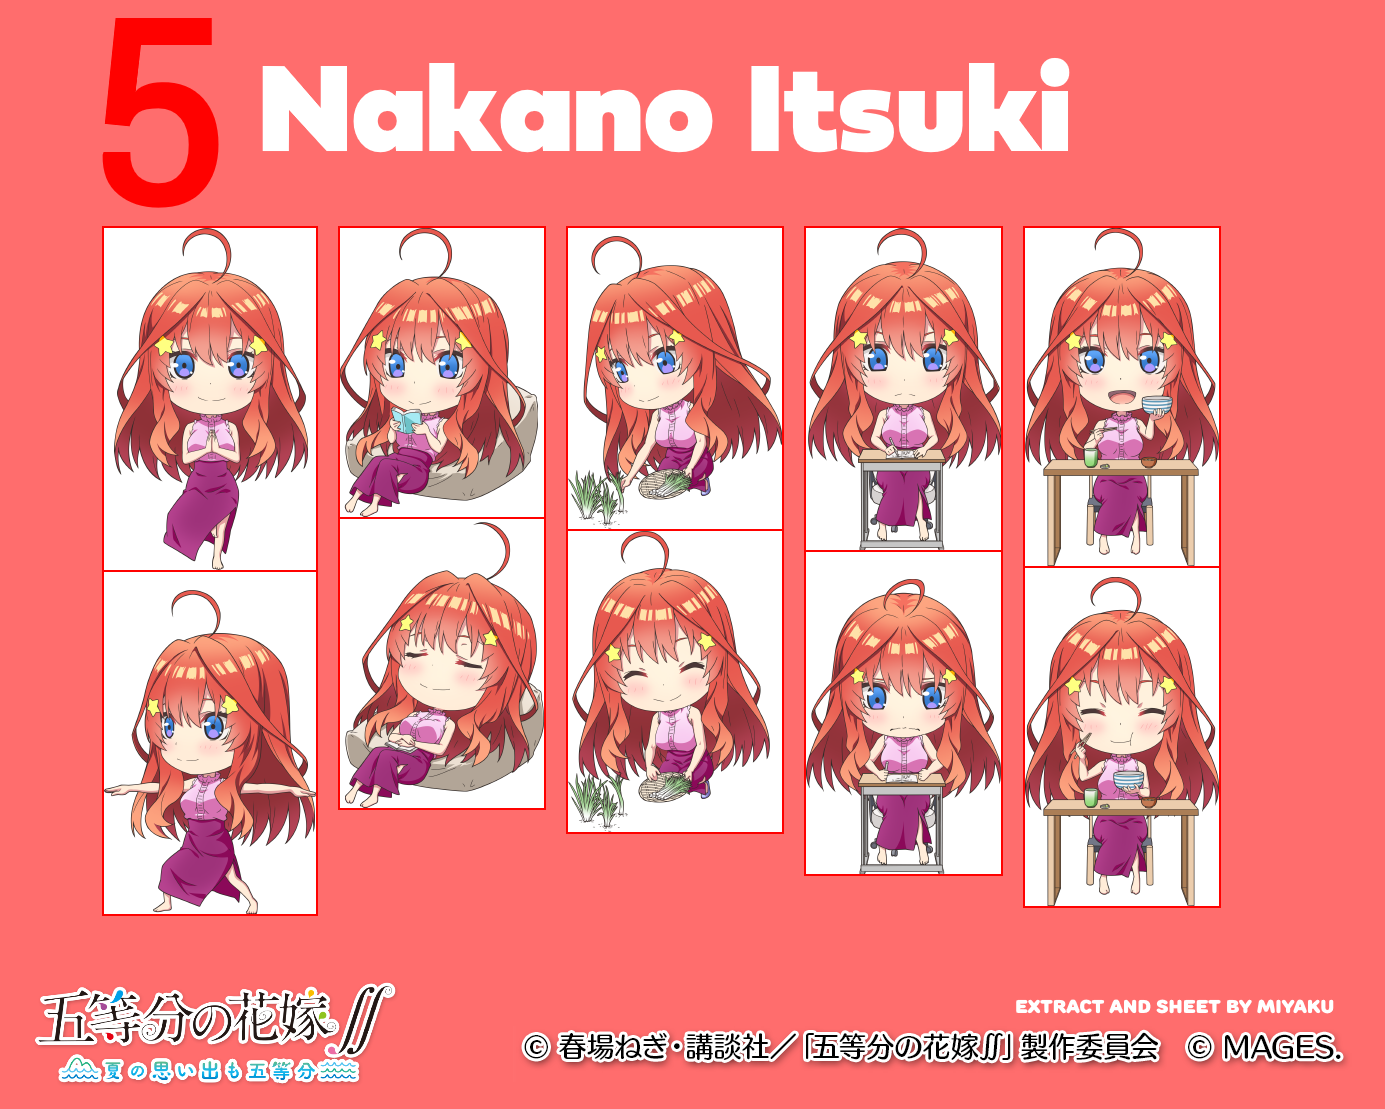 The Quintessential Quintuplets ∬: Summer Memories Also Come in Five - Itsuki Nakano (Chibi)